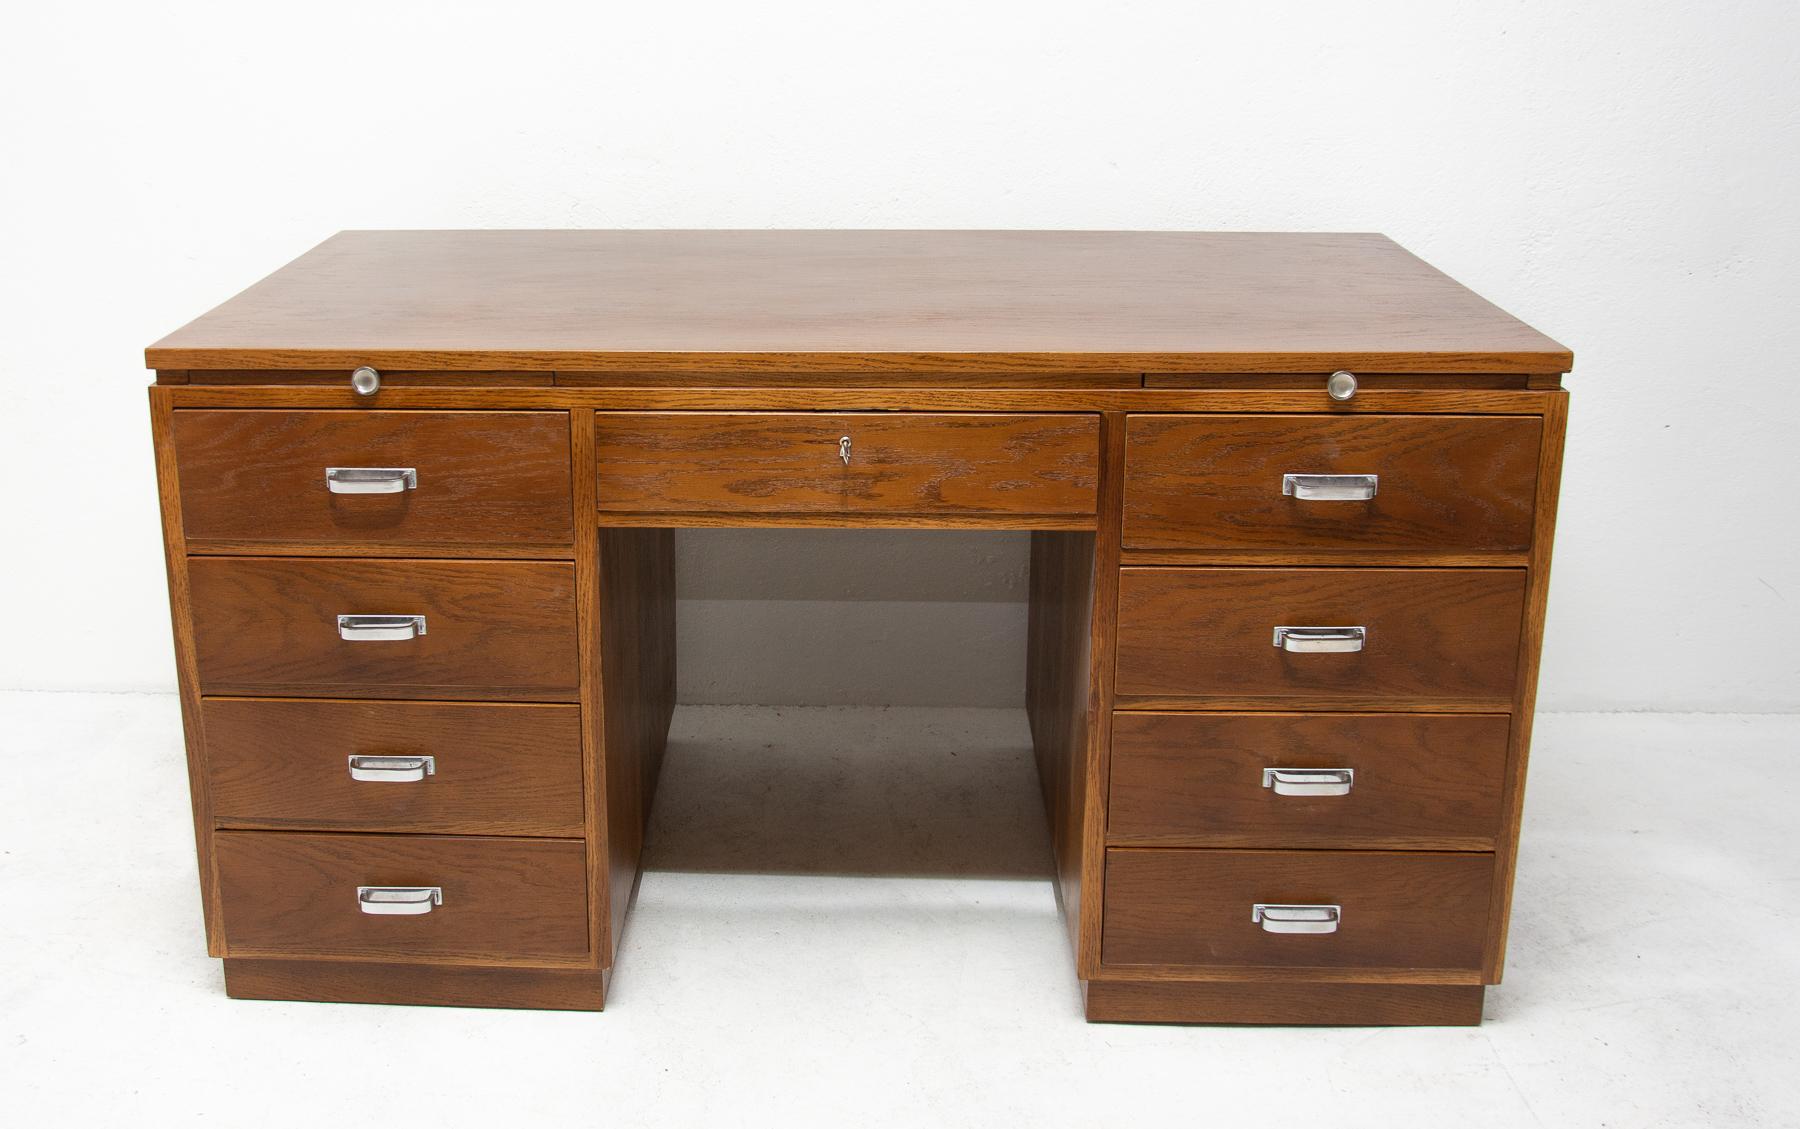 This massive functionalistic writing desk was made in the 1930s in Bohemia. It is veneered with oak, features four drawers with chromed handles on each side, and two pull-out plates. It is a very interesting design, typical for the functionalist